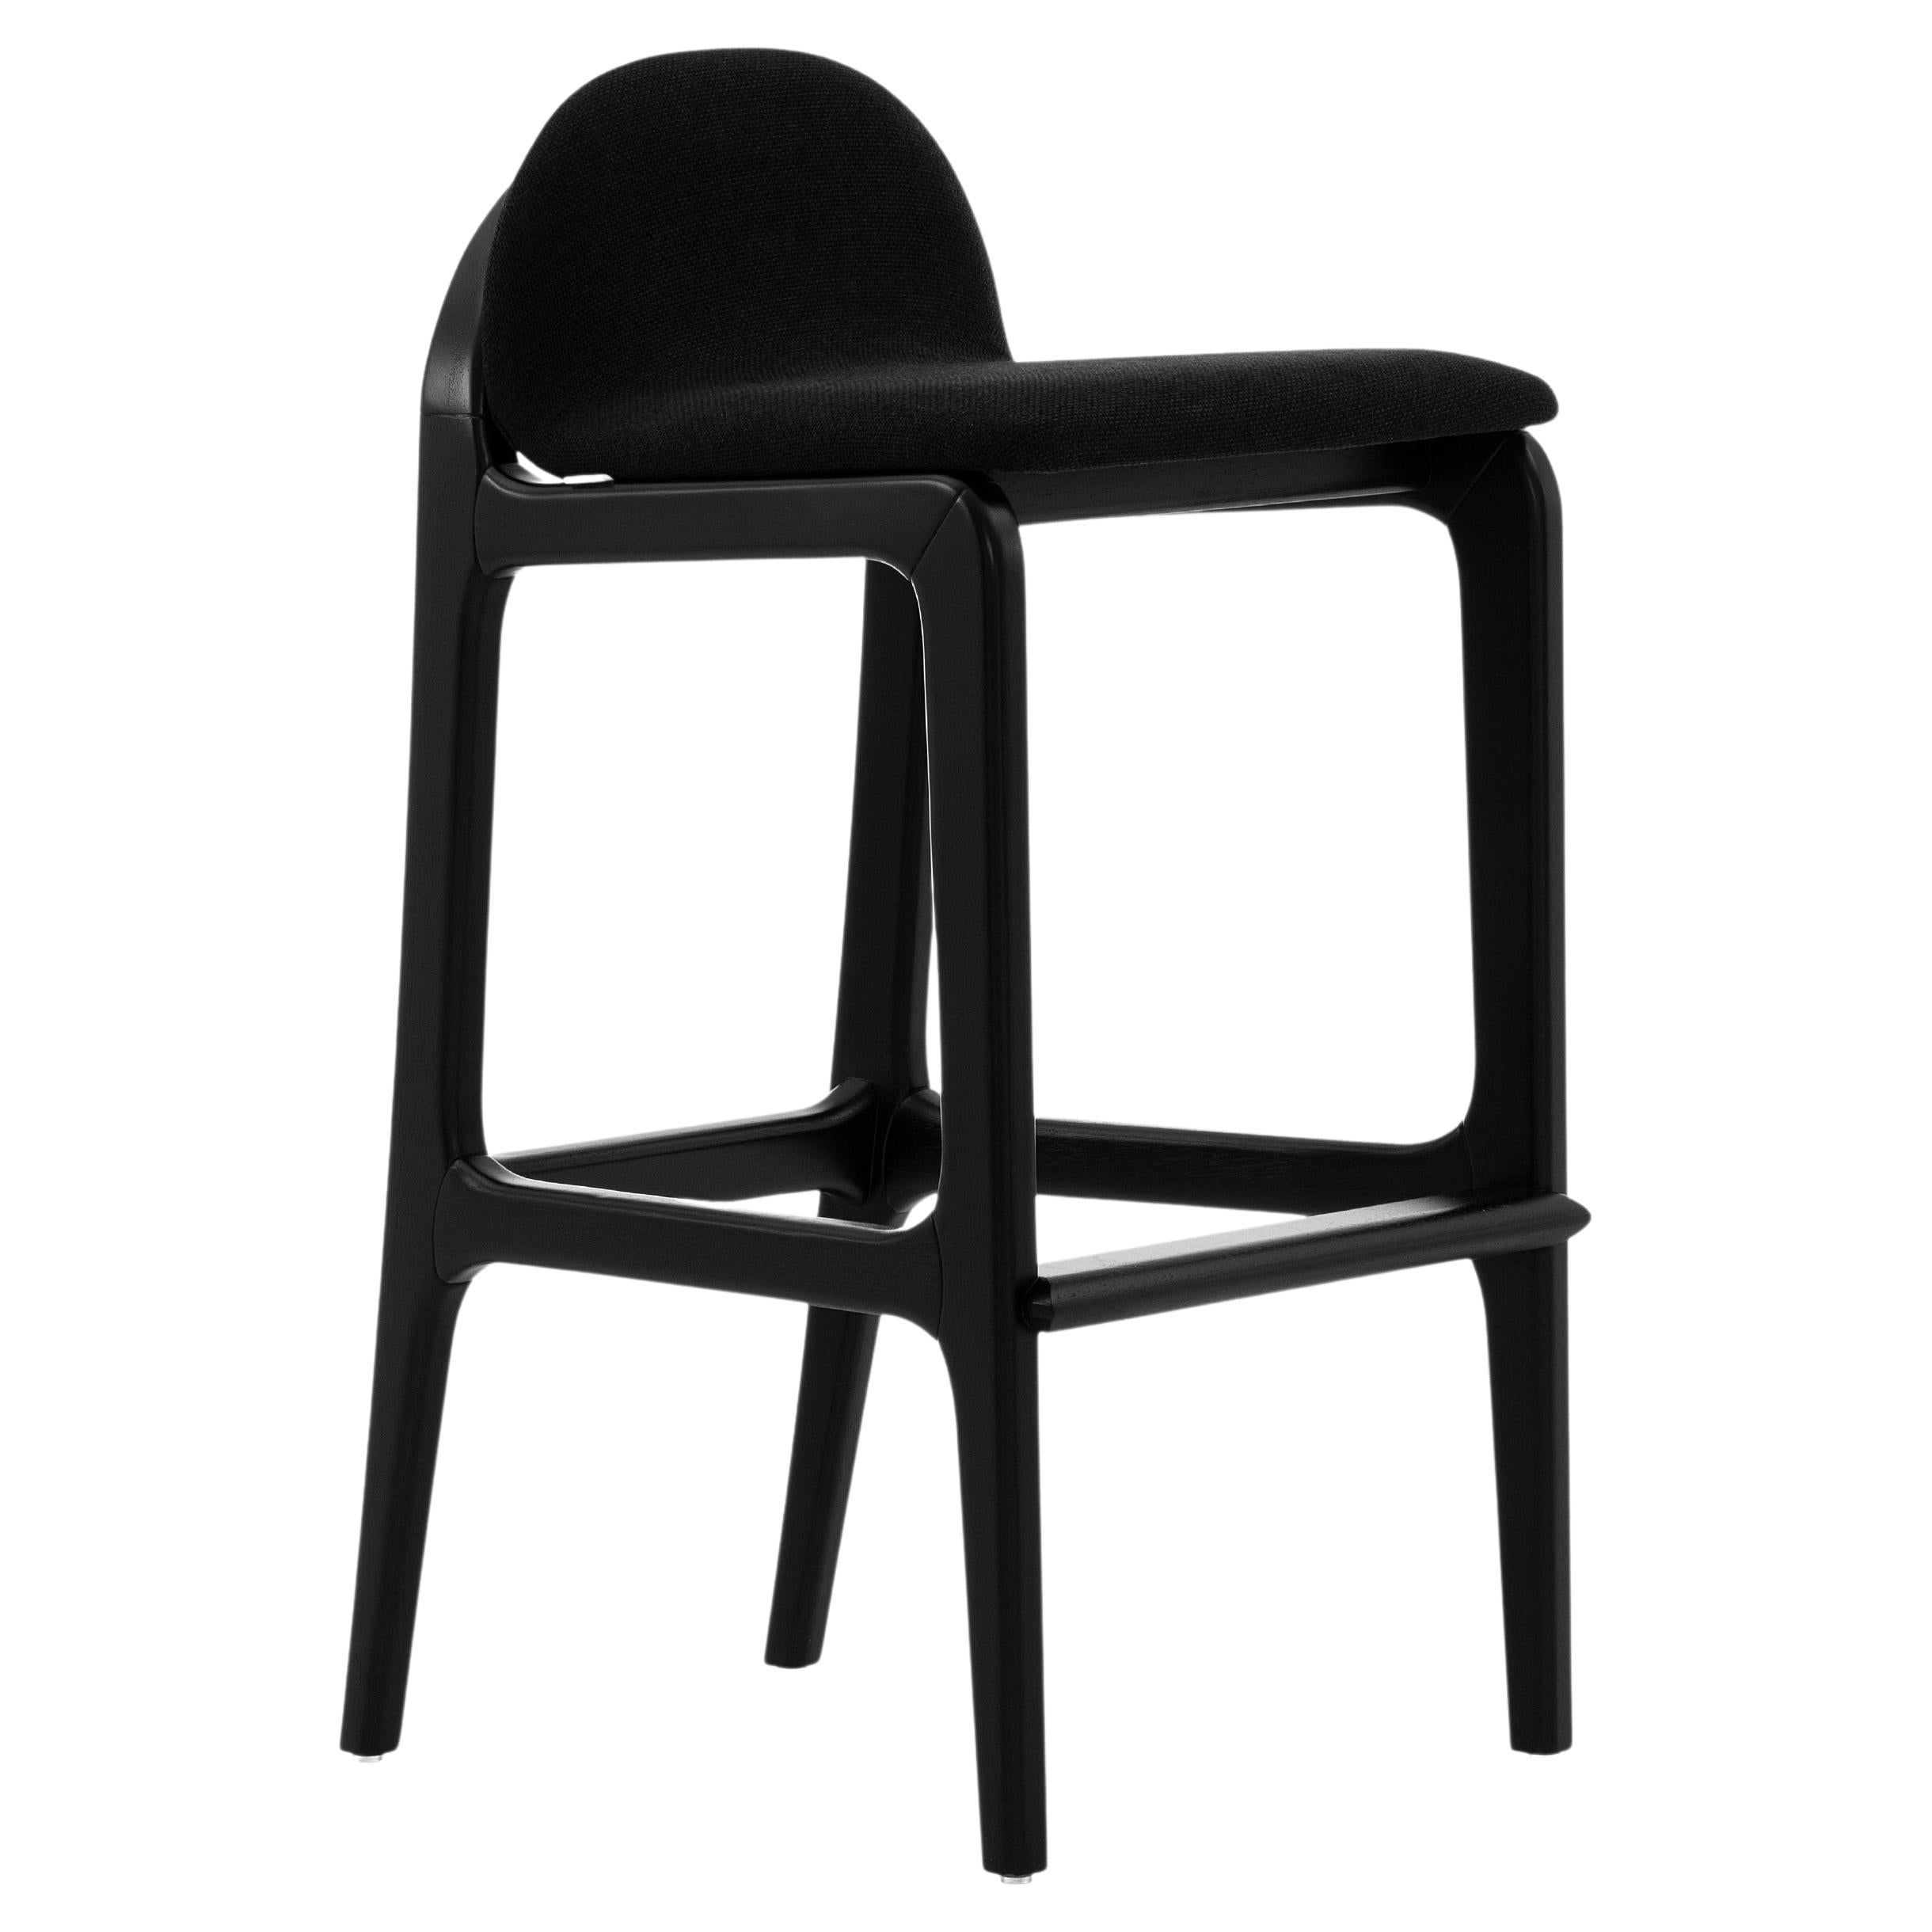 Ura Counter Stool in Black Wood Finish Base and Upholstered Black Seat For Sale